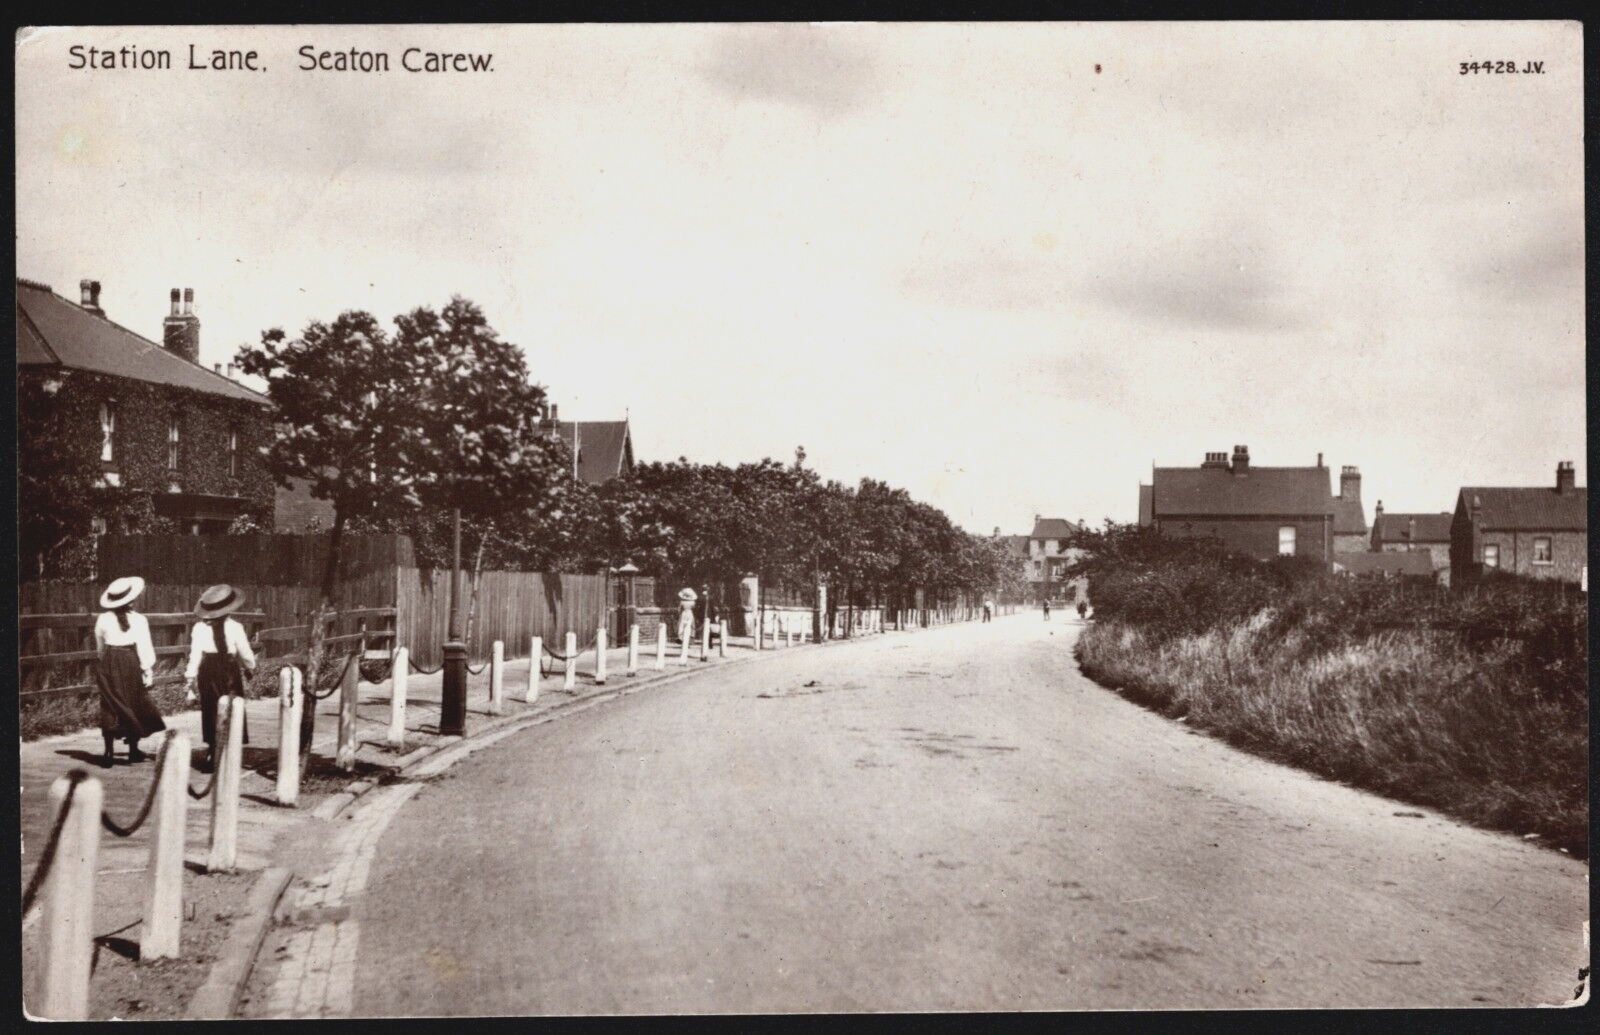 House Clearance - REAL PHOTO POSTCARD GIRLS IN UNIFORM-STATION LANE-SEATON CAREW WEST HARTLEPOOL